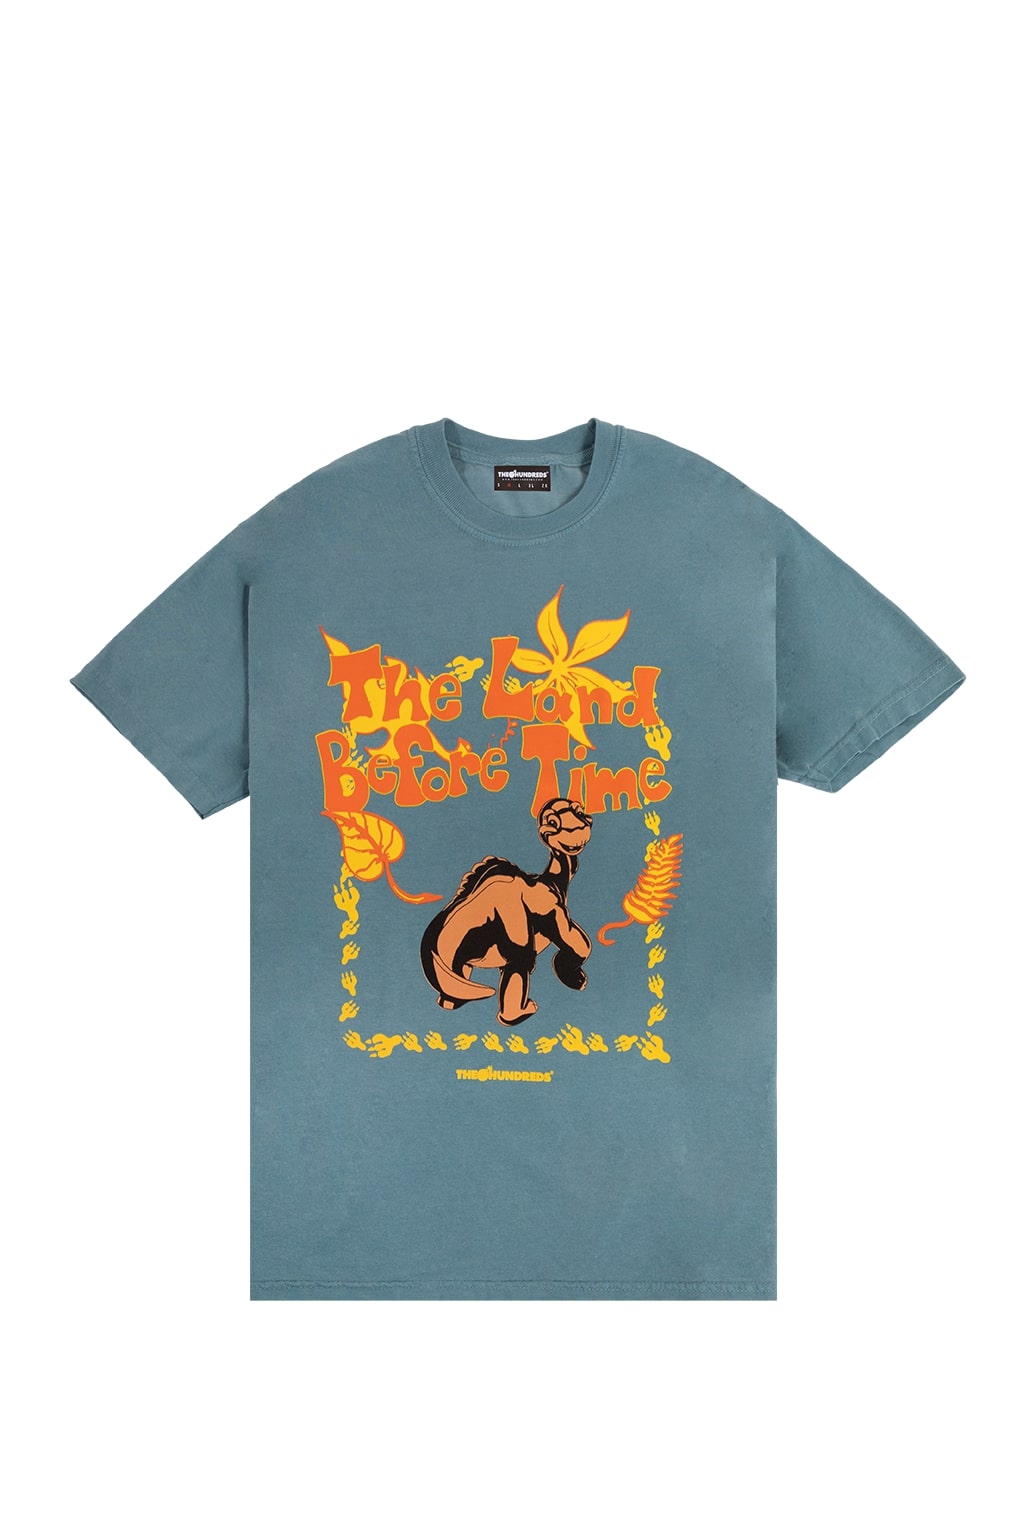 The Hundreds pineapple x Land Before Time little foot tee